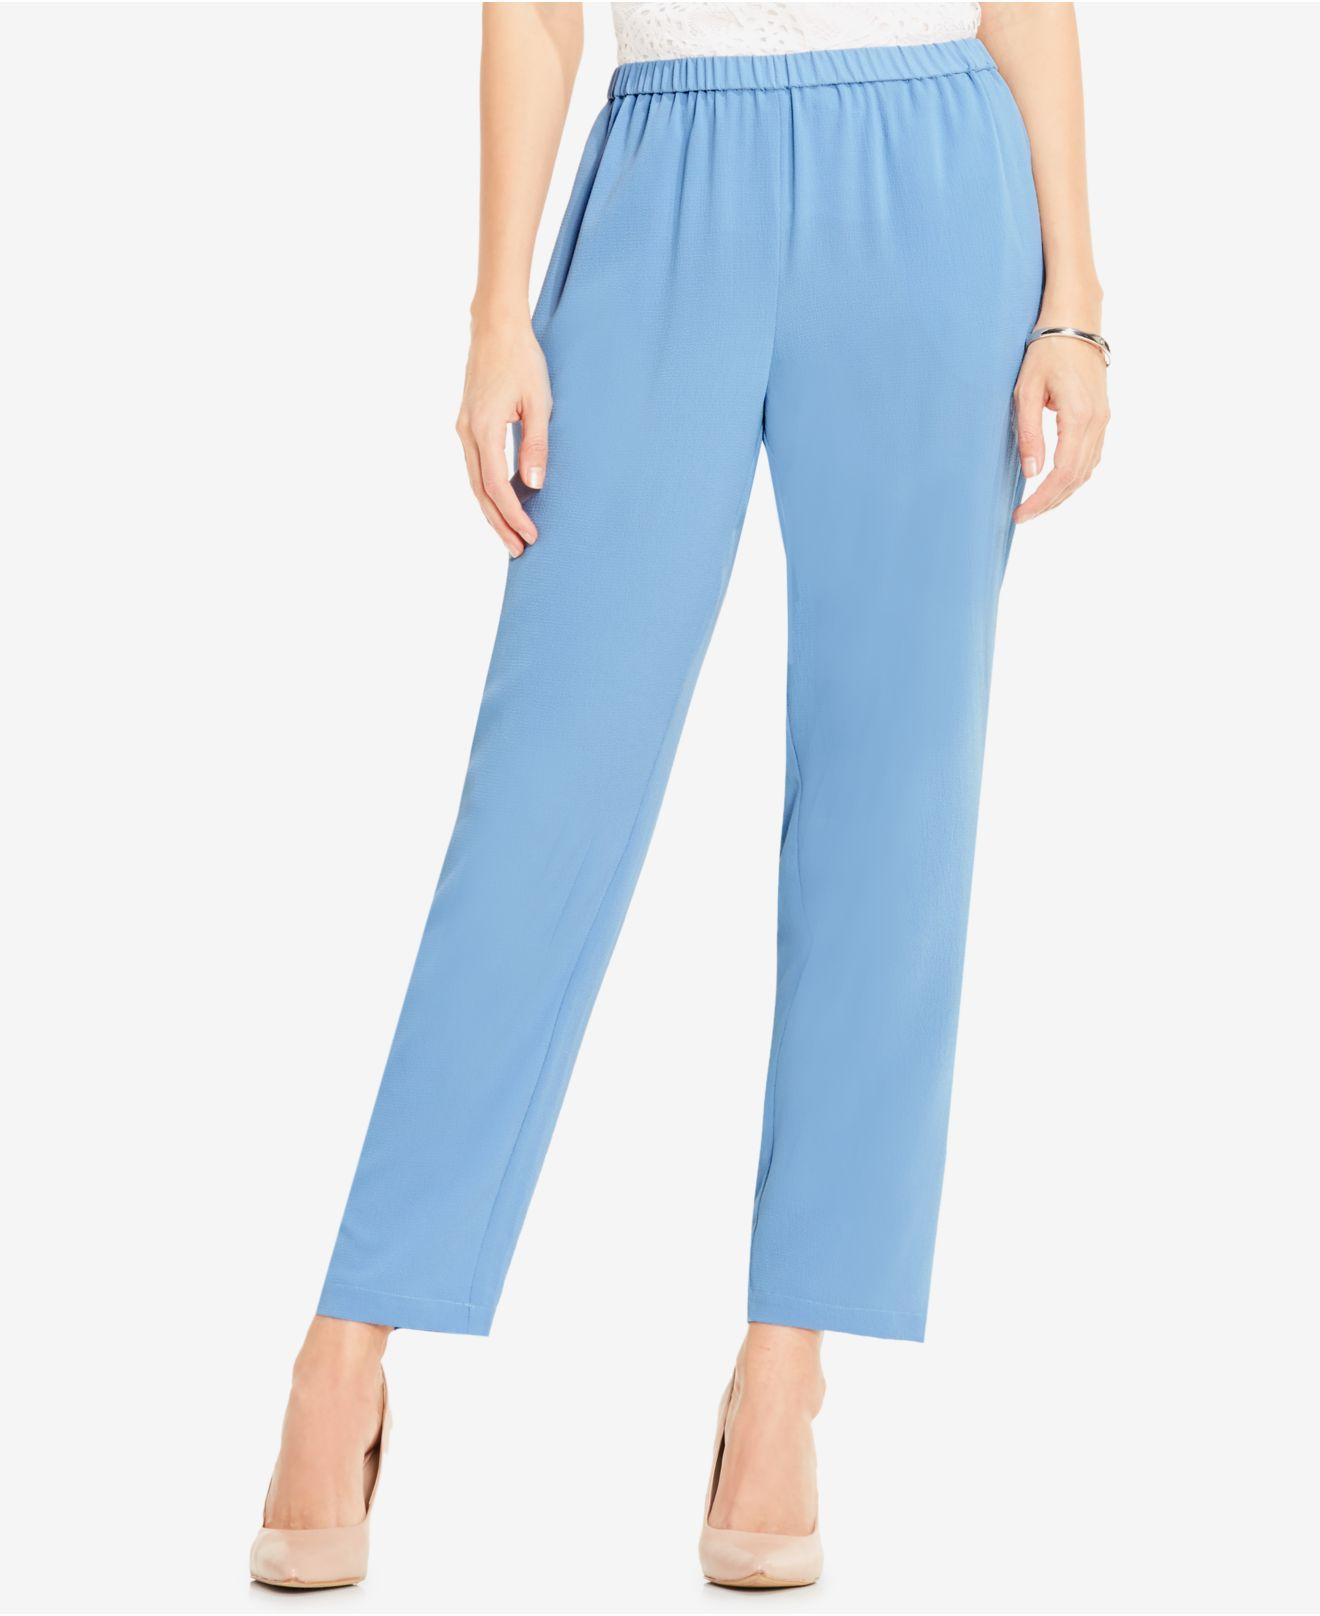 Lyst - Vince Camuto Crepe Pull-on Pants in Blue